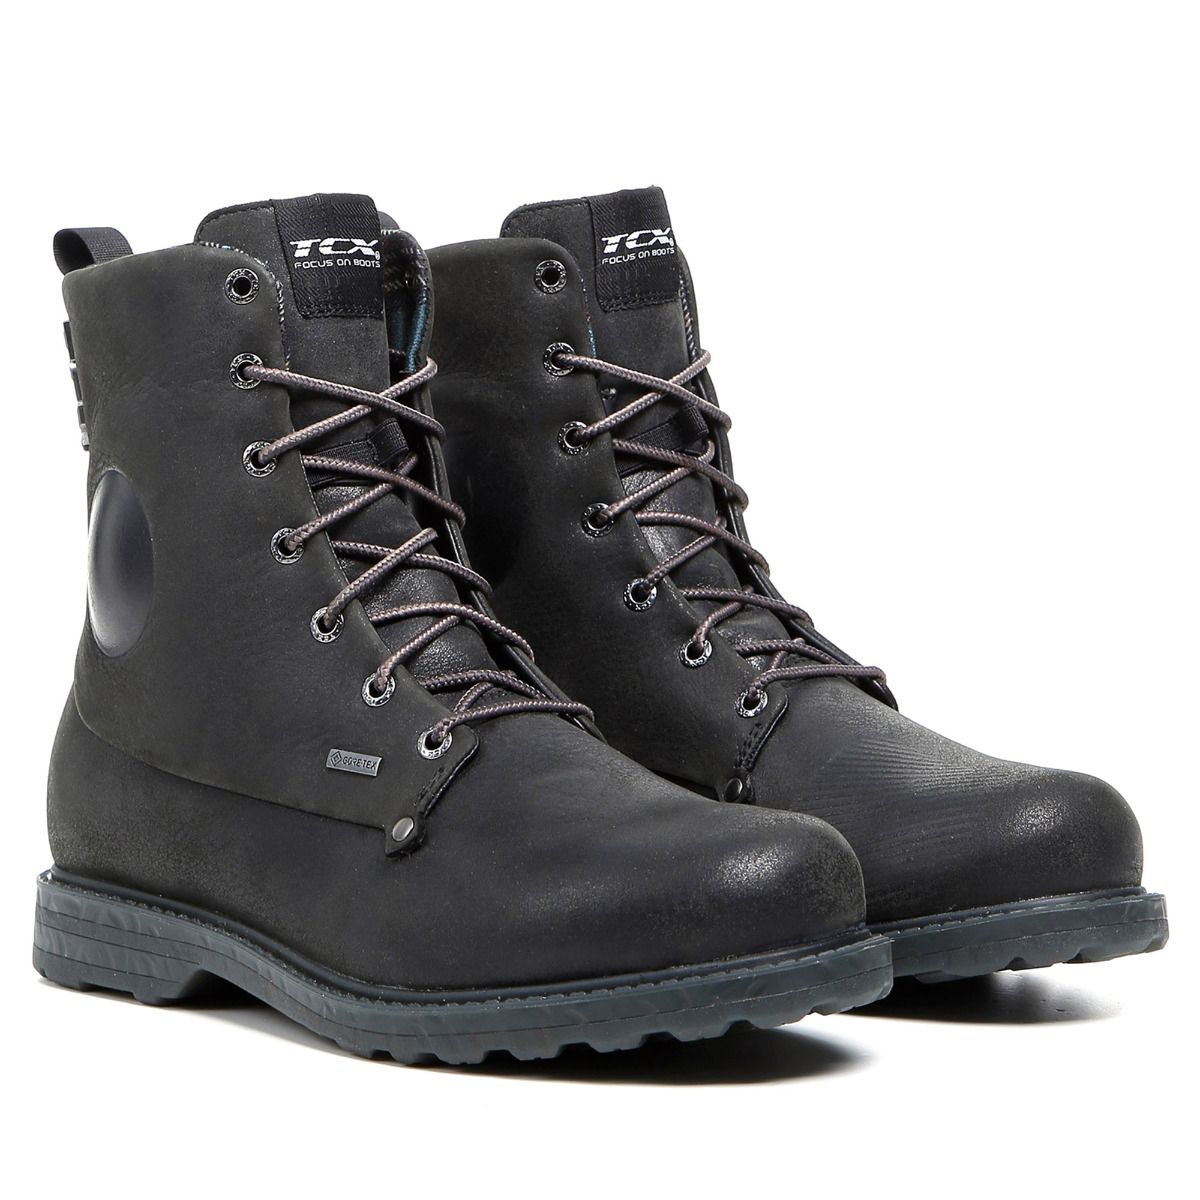 Image of TCX Boot Blend 2 Gore-Tex Black Size 45 ID 8000958234399